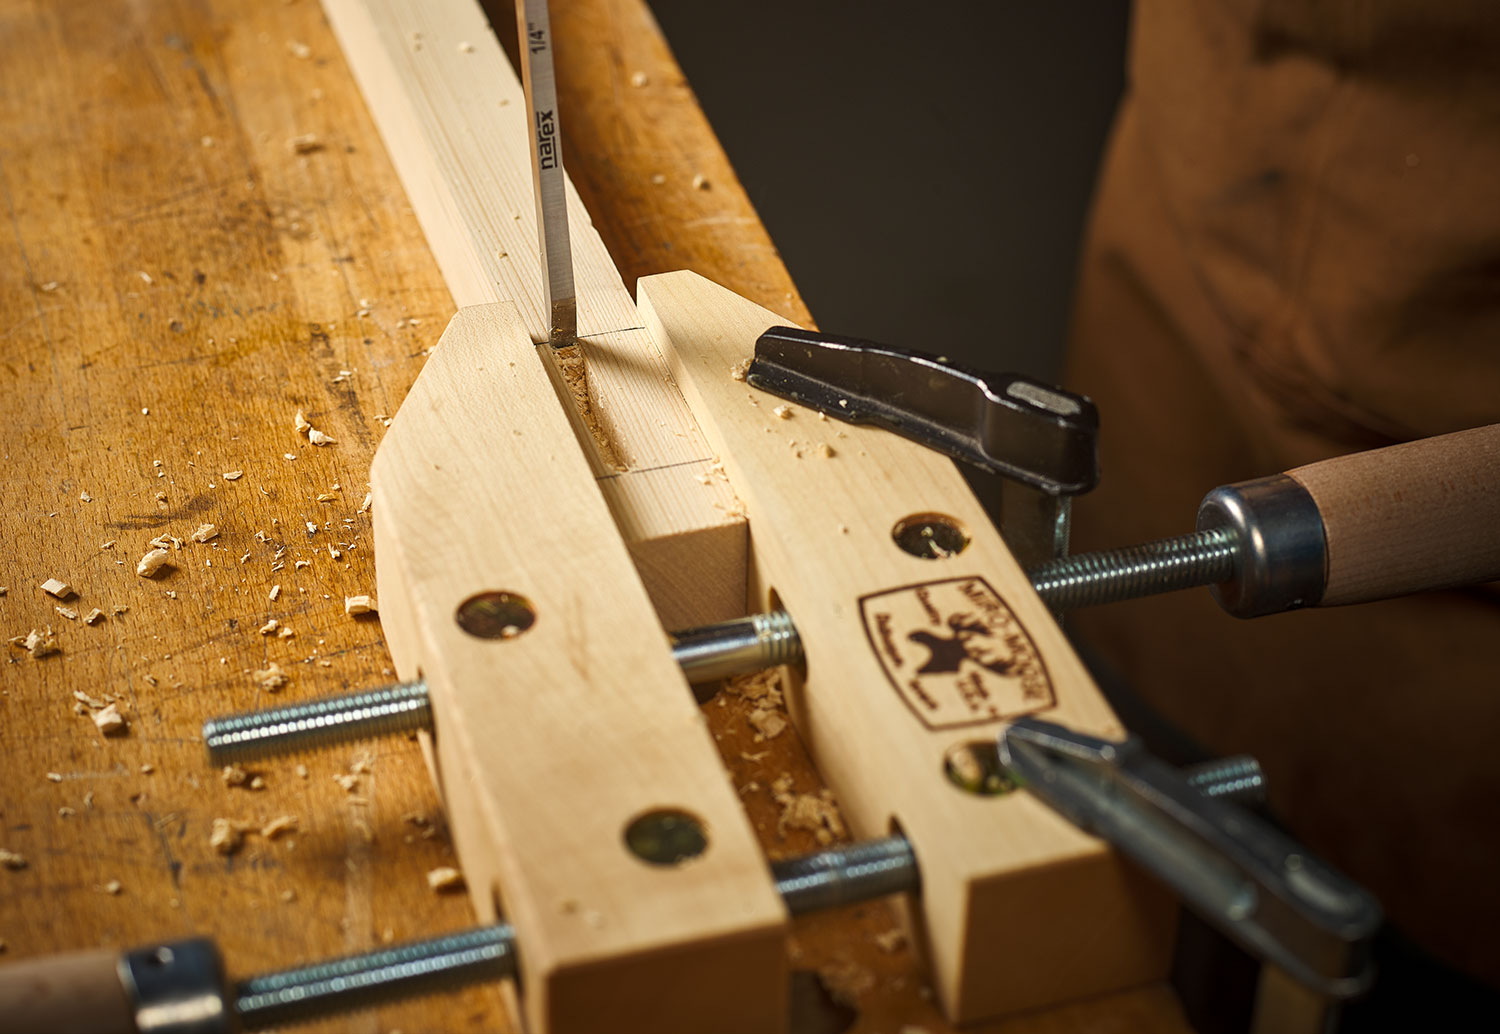 A Narex mortise chisel is being used to cut a mortise on a board in a clamp.